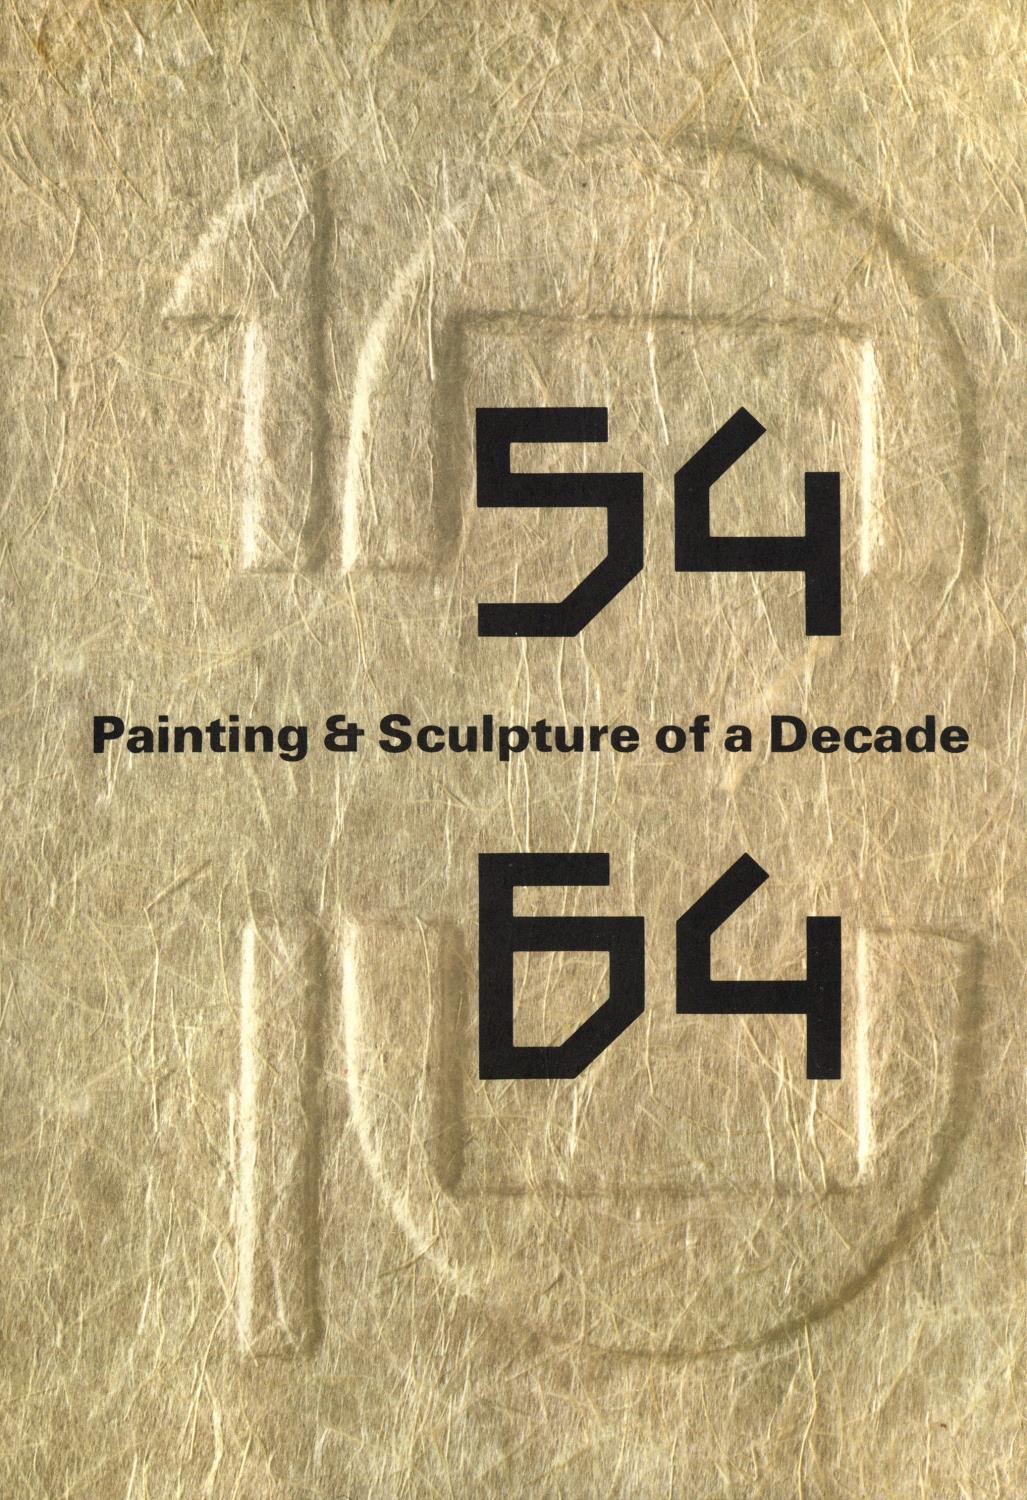 54 – 64: Painting & Sculpture of a Decade